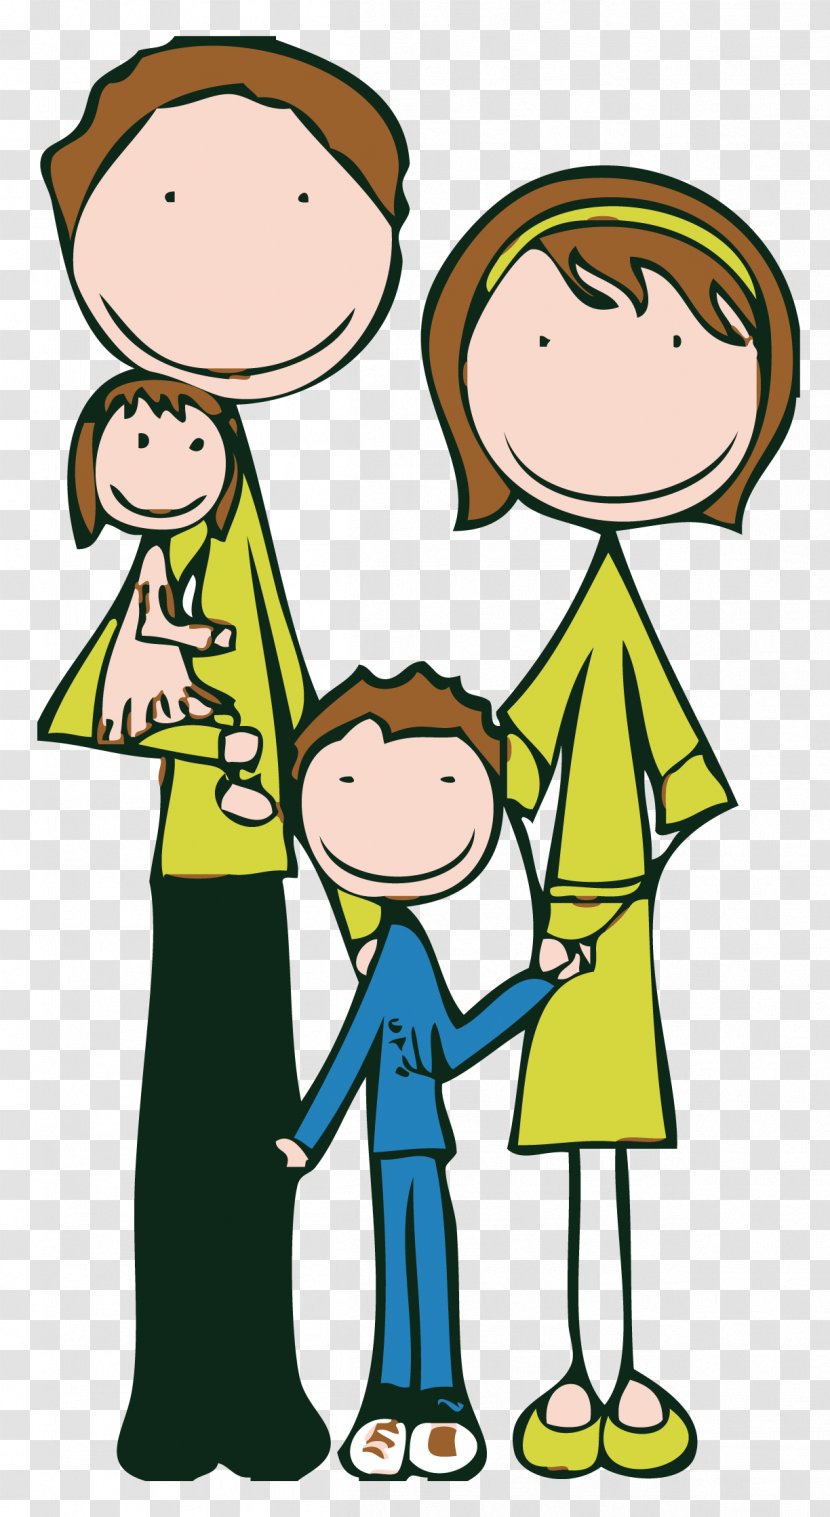 Royalty-free Family Child - Familys Clipart Transparent PNG